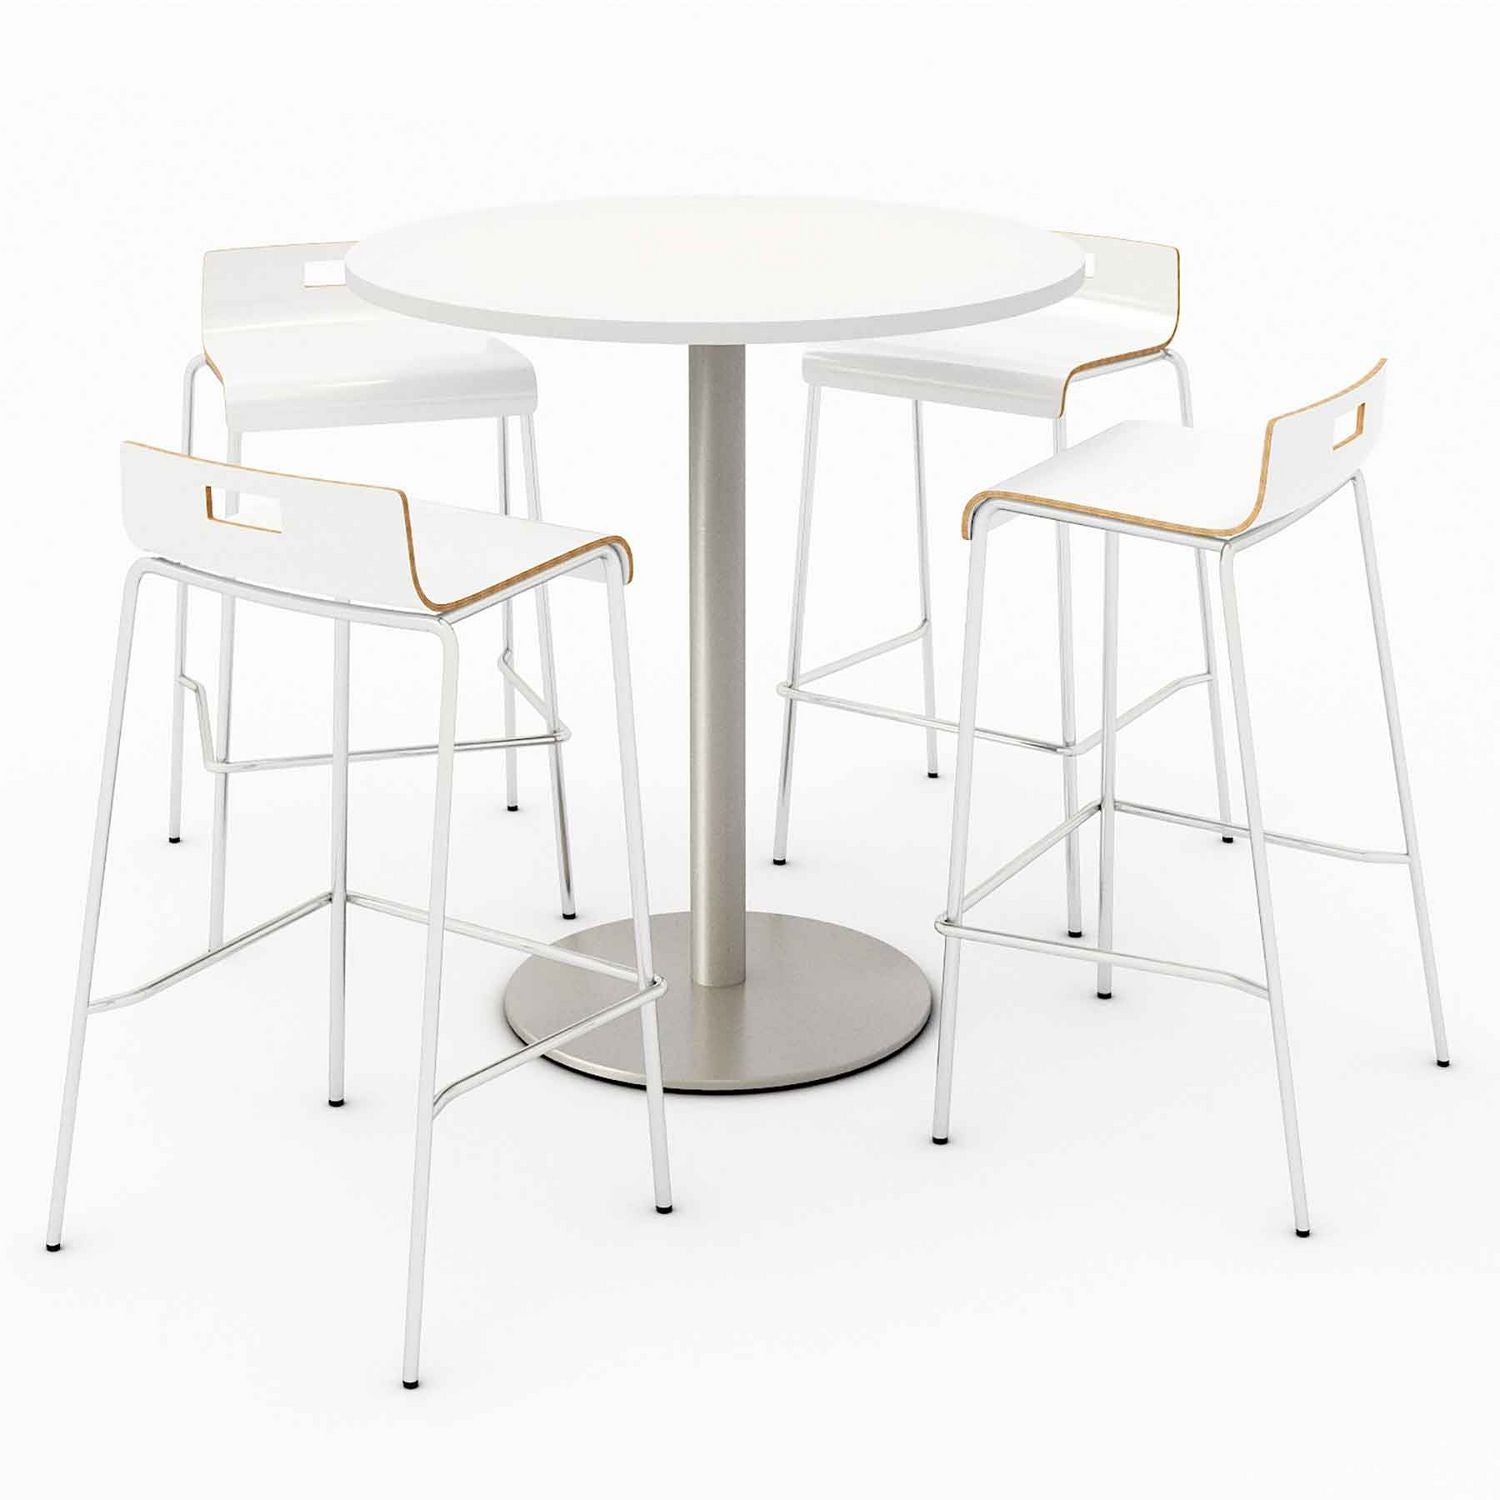 pedestal-bistro-table-with-four-white-jive-series-barstools-round-36-dia-x-41h-designer-white-ships-in-4-6-business-days_kfi840031900128 - 1